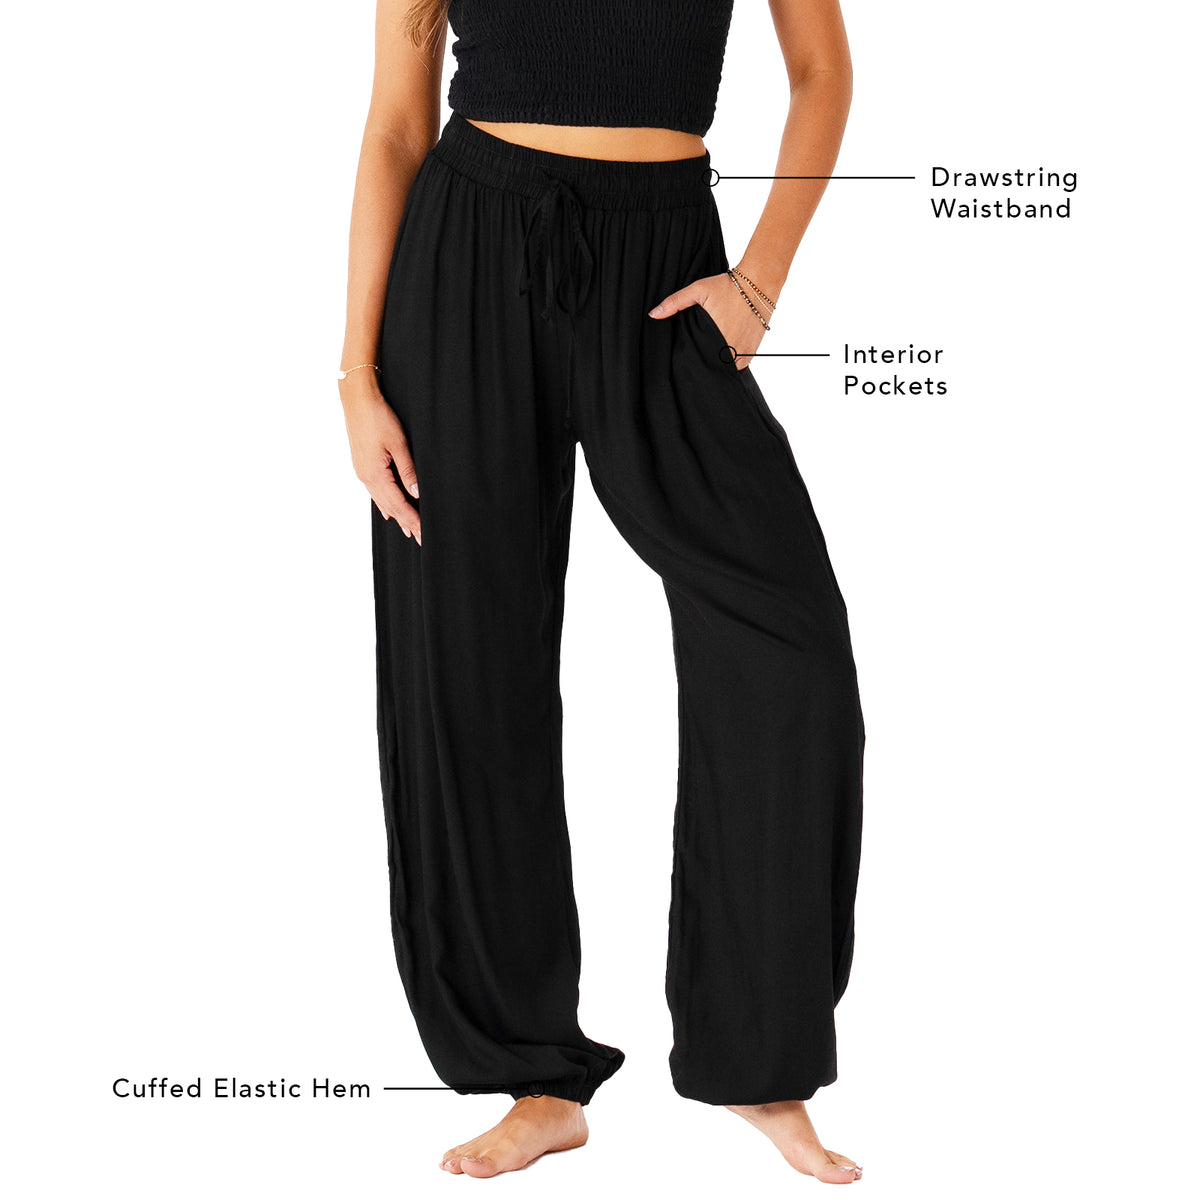 Model wearing black harem pants with a drawstring waistband. The photo outlines the features of the pants including a drawstring waistband, interior pockets, and a cuffed elastic bottom hem